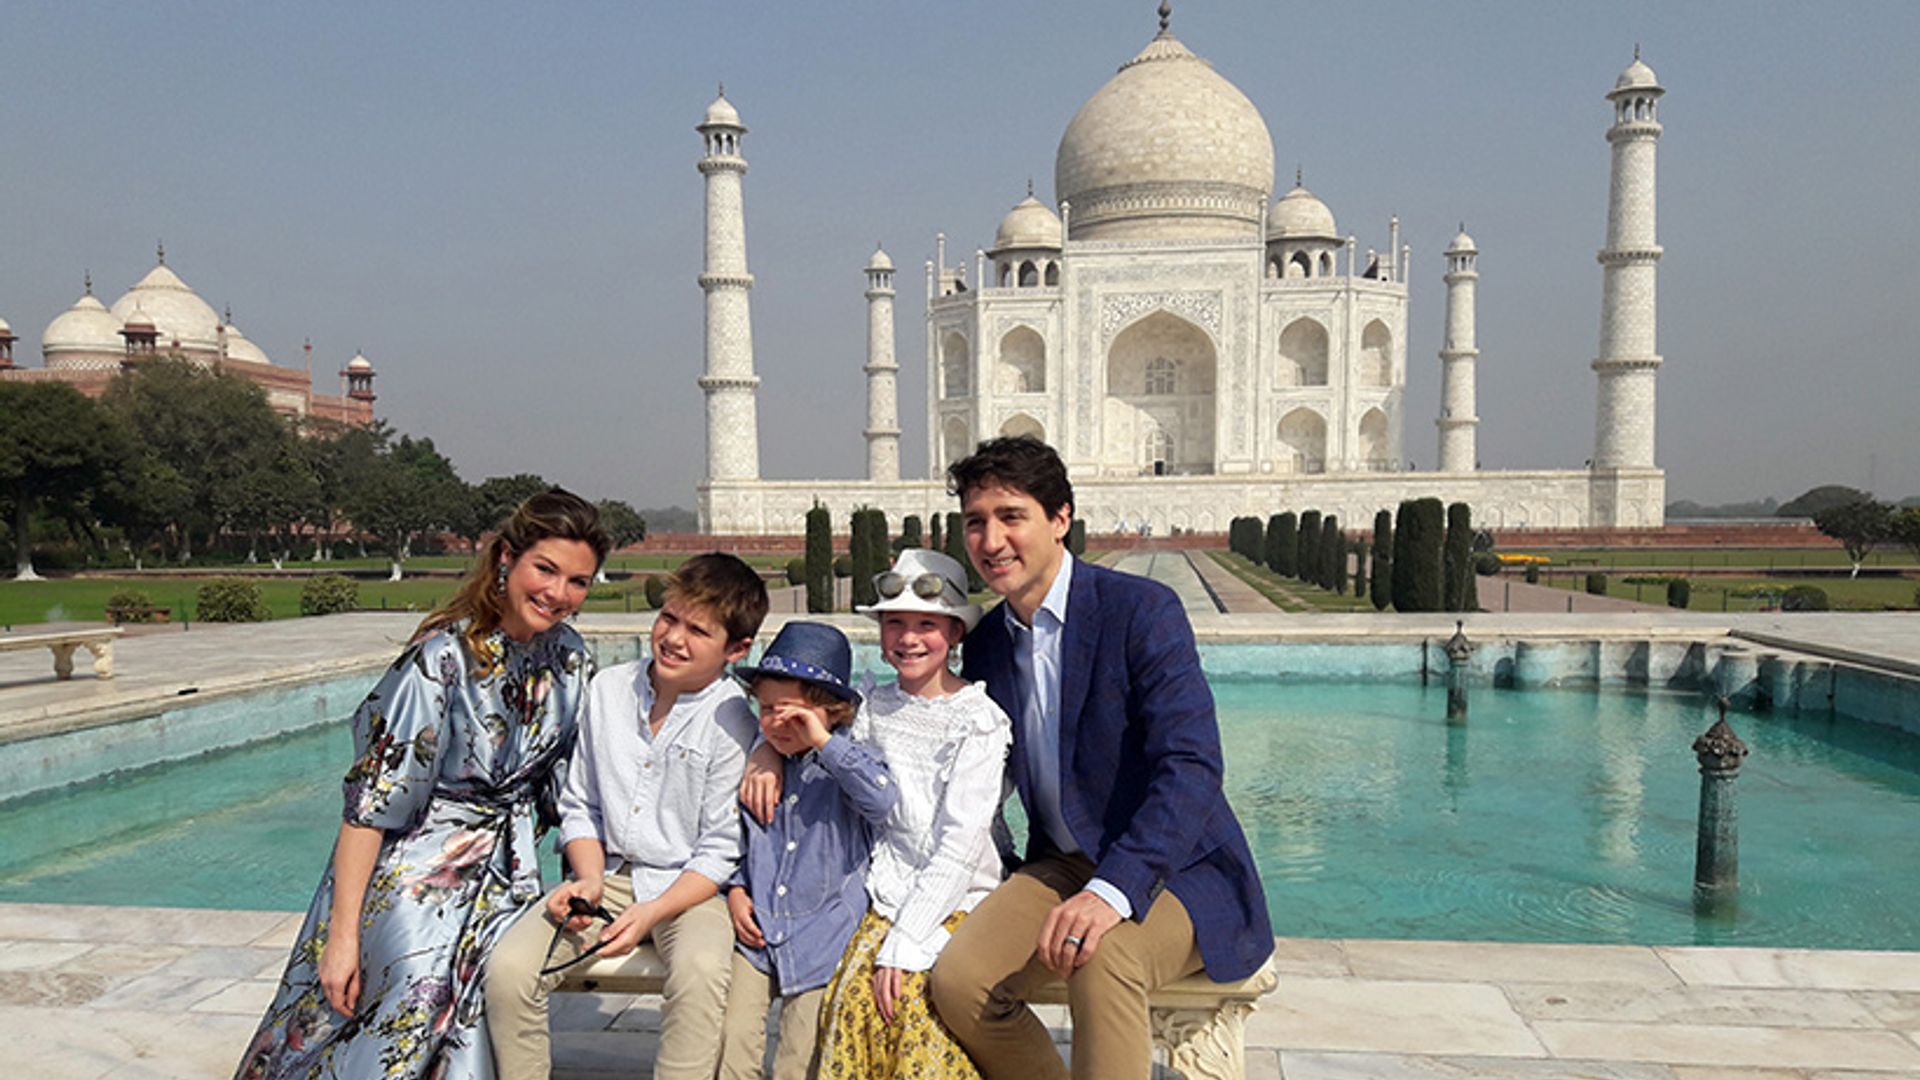 Justin Trudeau and family pose for sweet photos at Taj Mahal